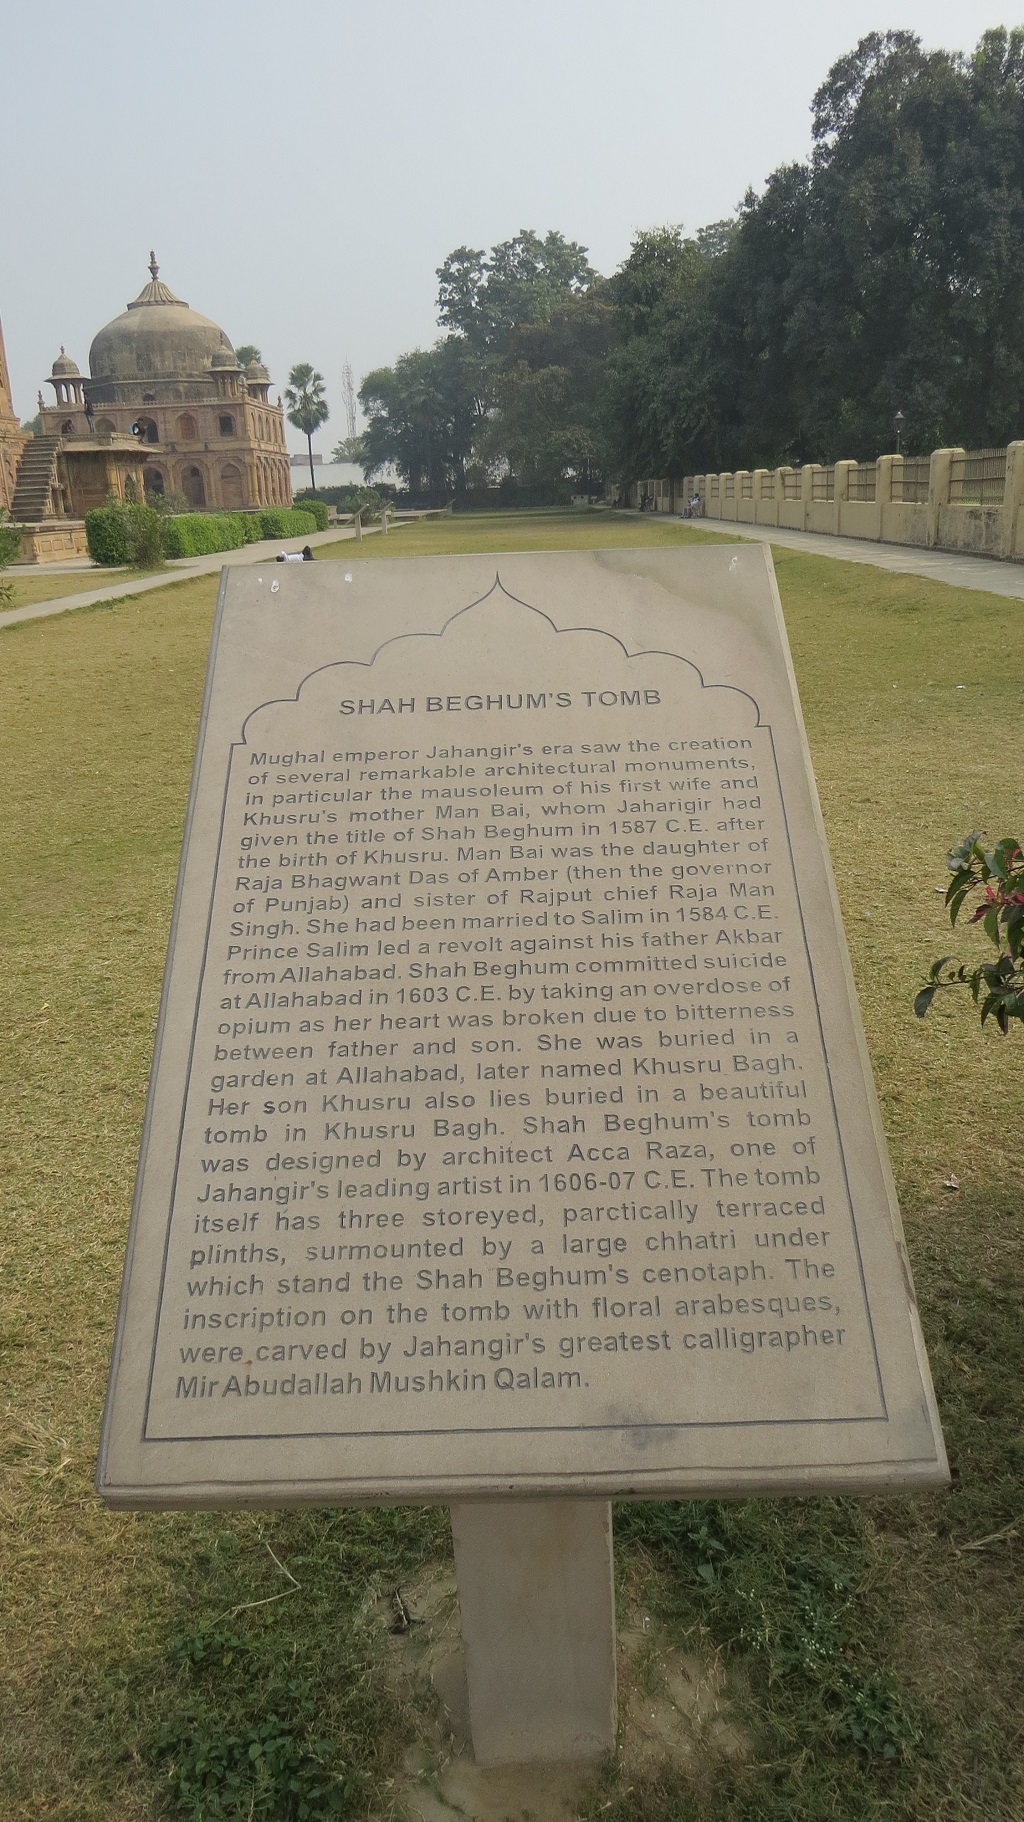 About: Shah Beghum’s Tomb – Designed by Architect Acca Raza